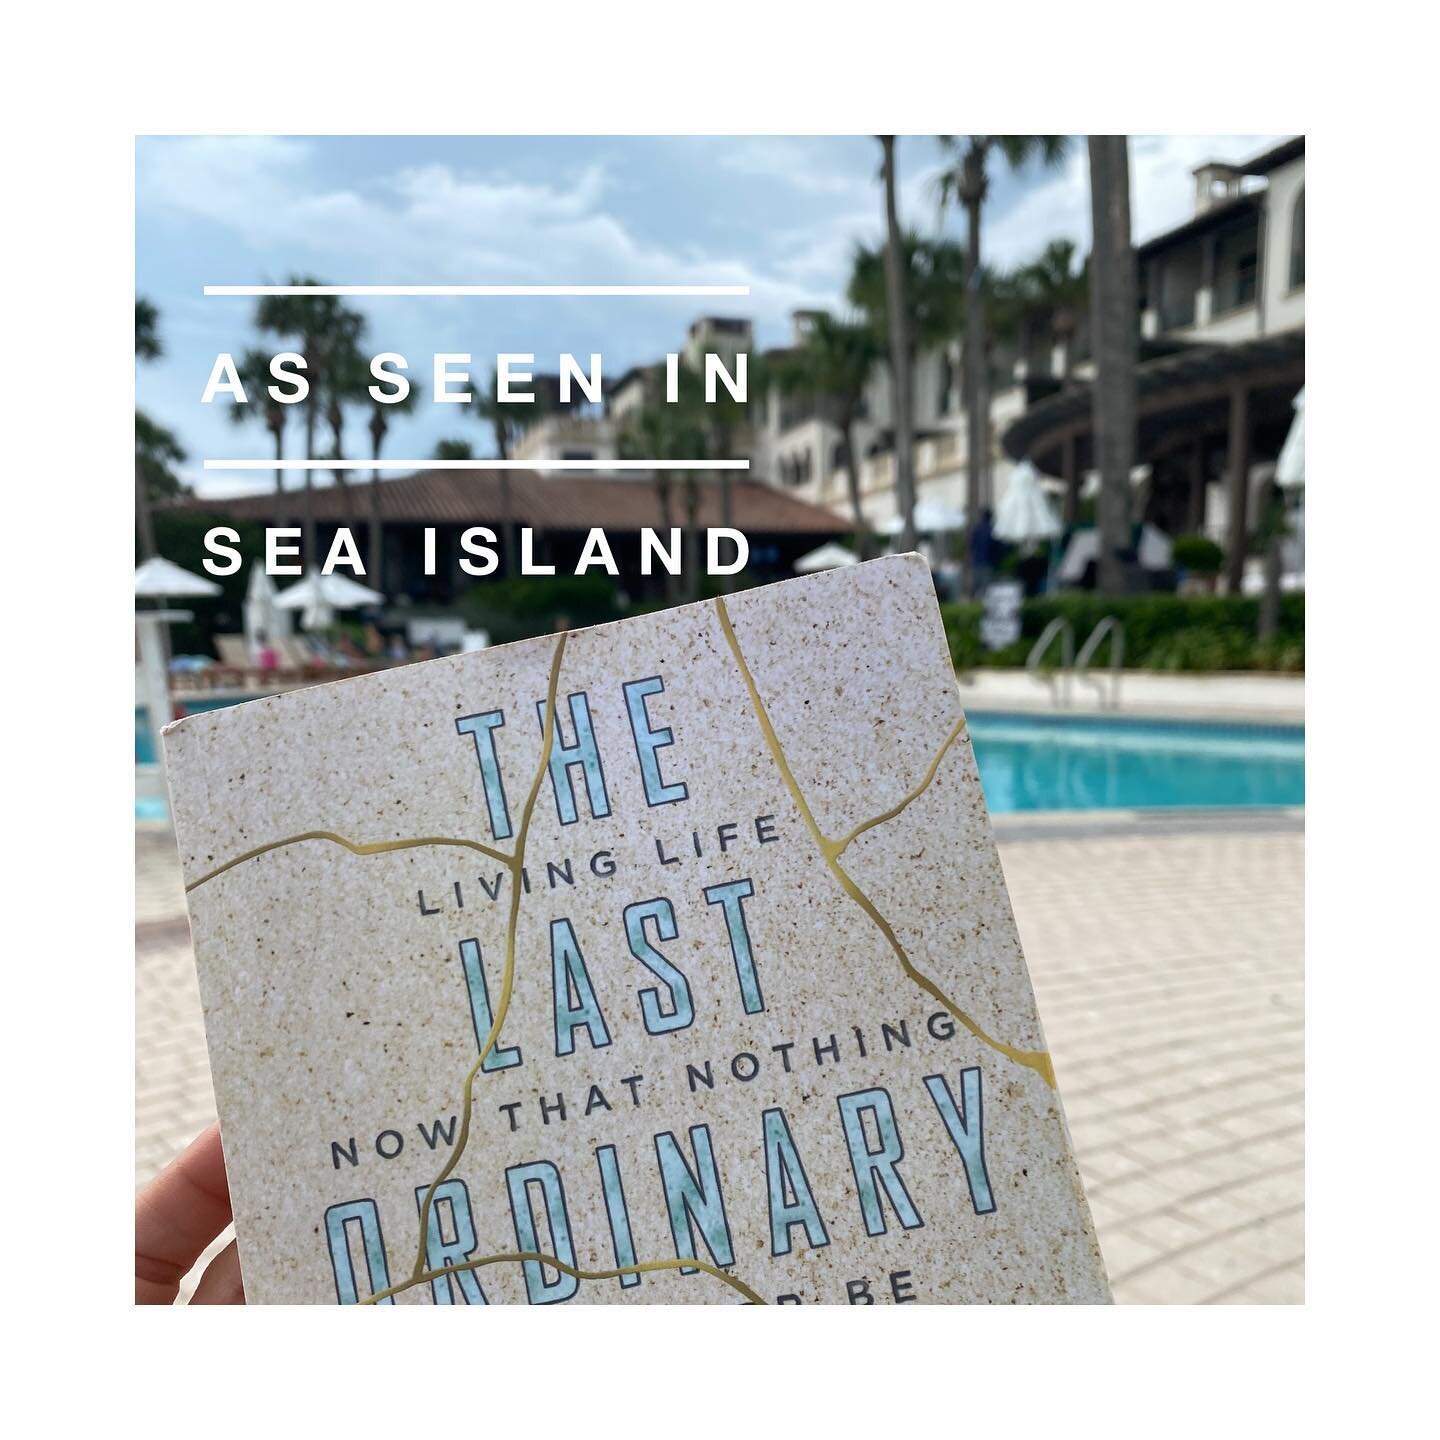 My first &ldquo;family read&rdquo; (that I know of!)❤️Thank you Charlotte friend Priscilla Chapman @priscillachapman for sending me this great message from poolside in Sea Island Georgia:

&ldquo;I&rsquo;m at the beach with my family.  Gave your book